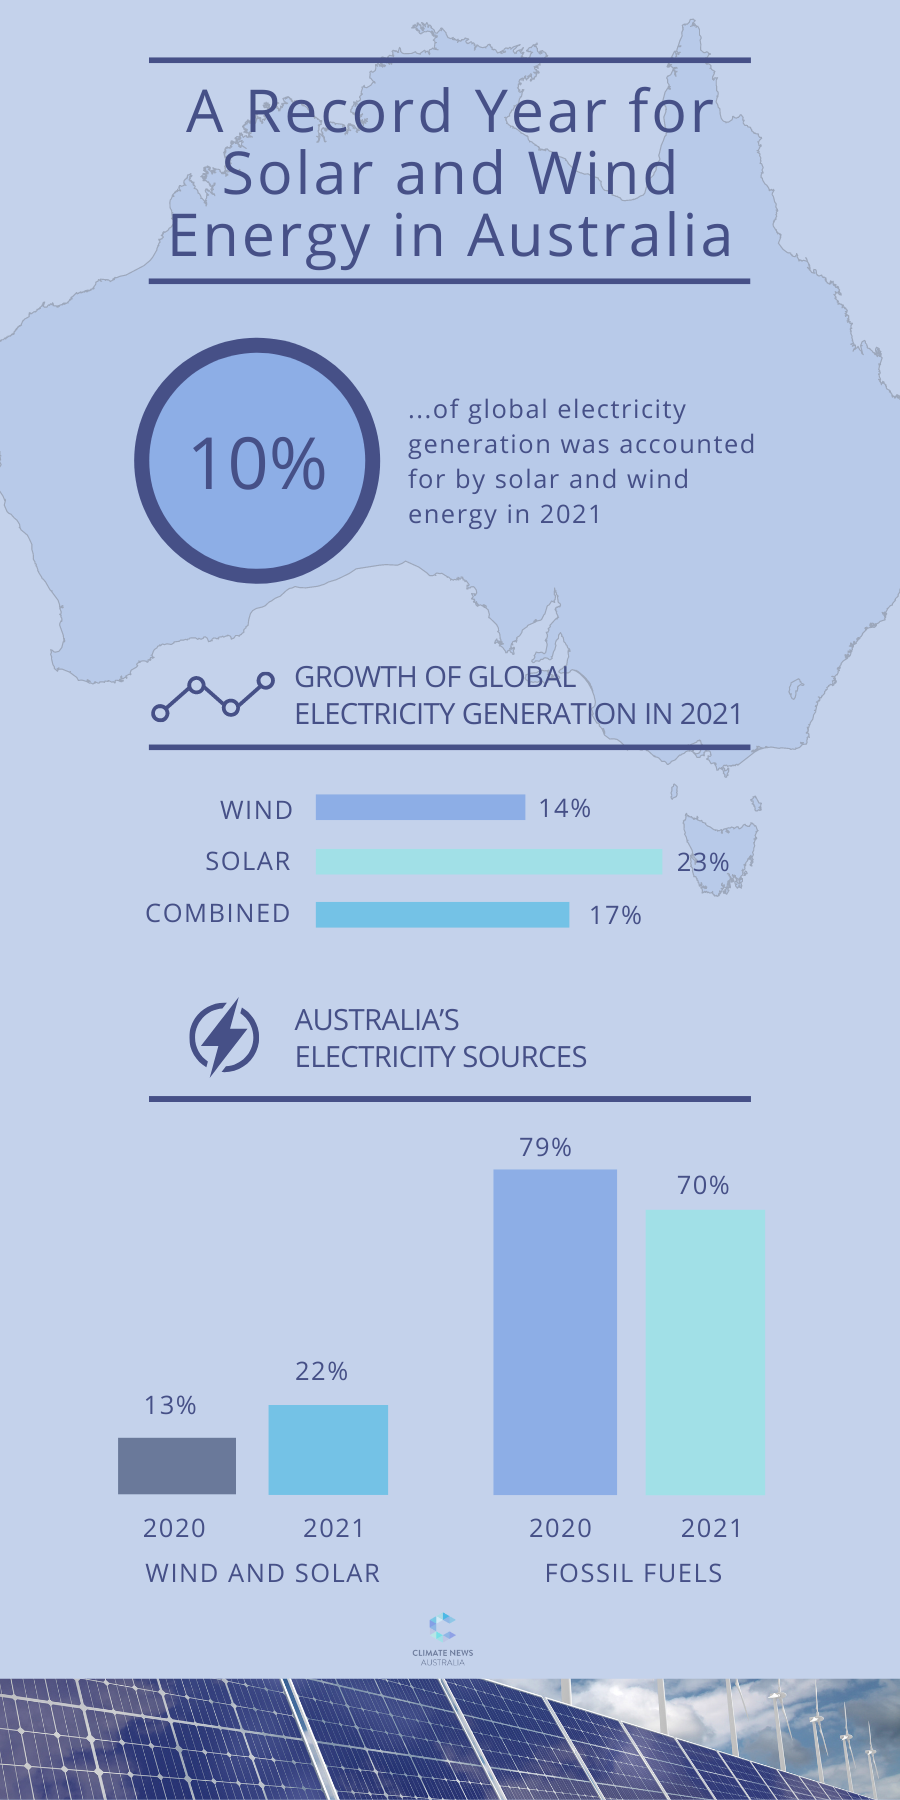 A Record Year for Solar and Wind Energy in Australia